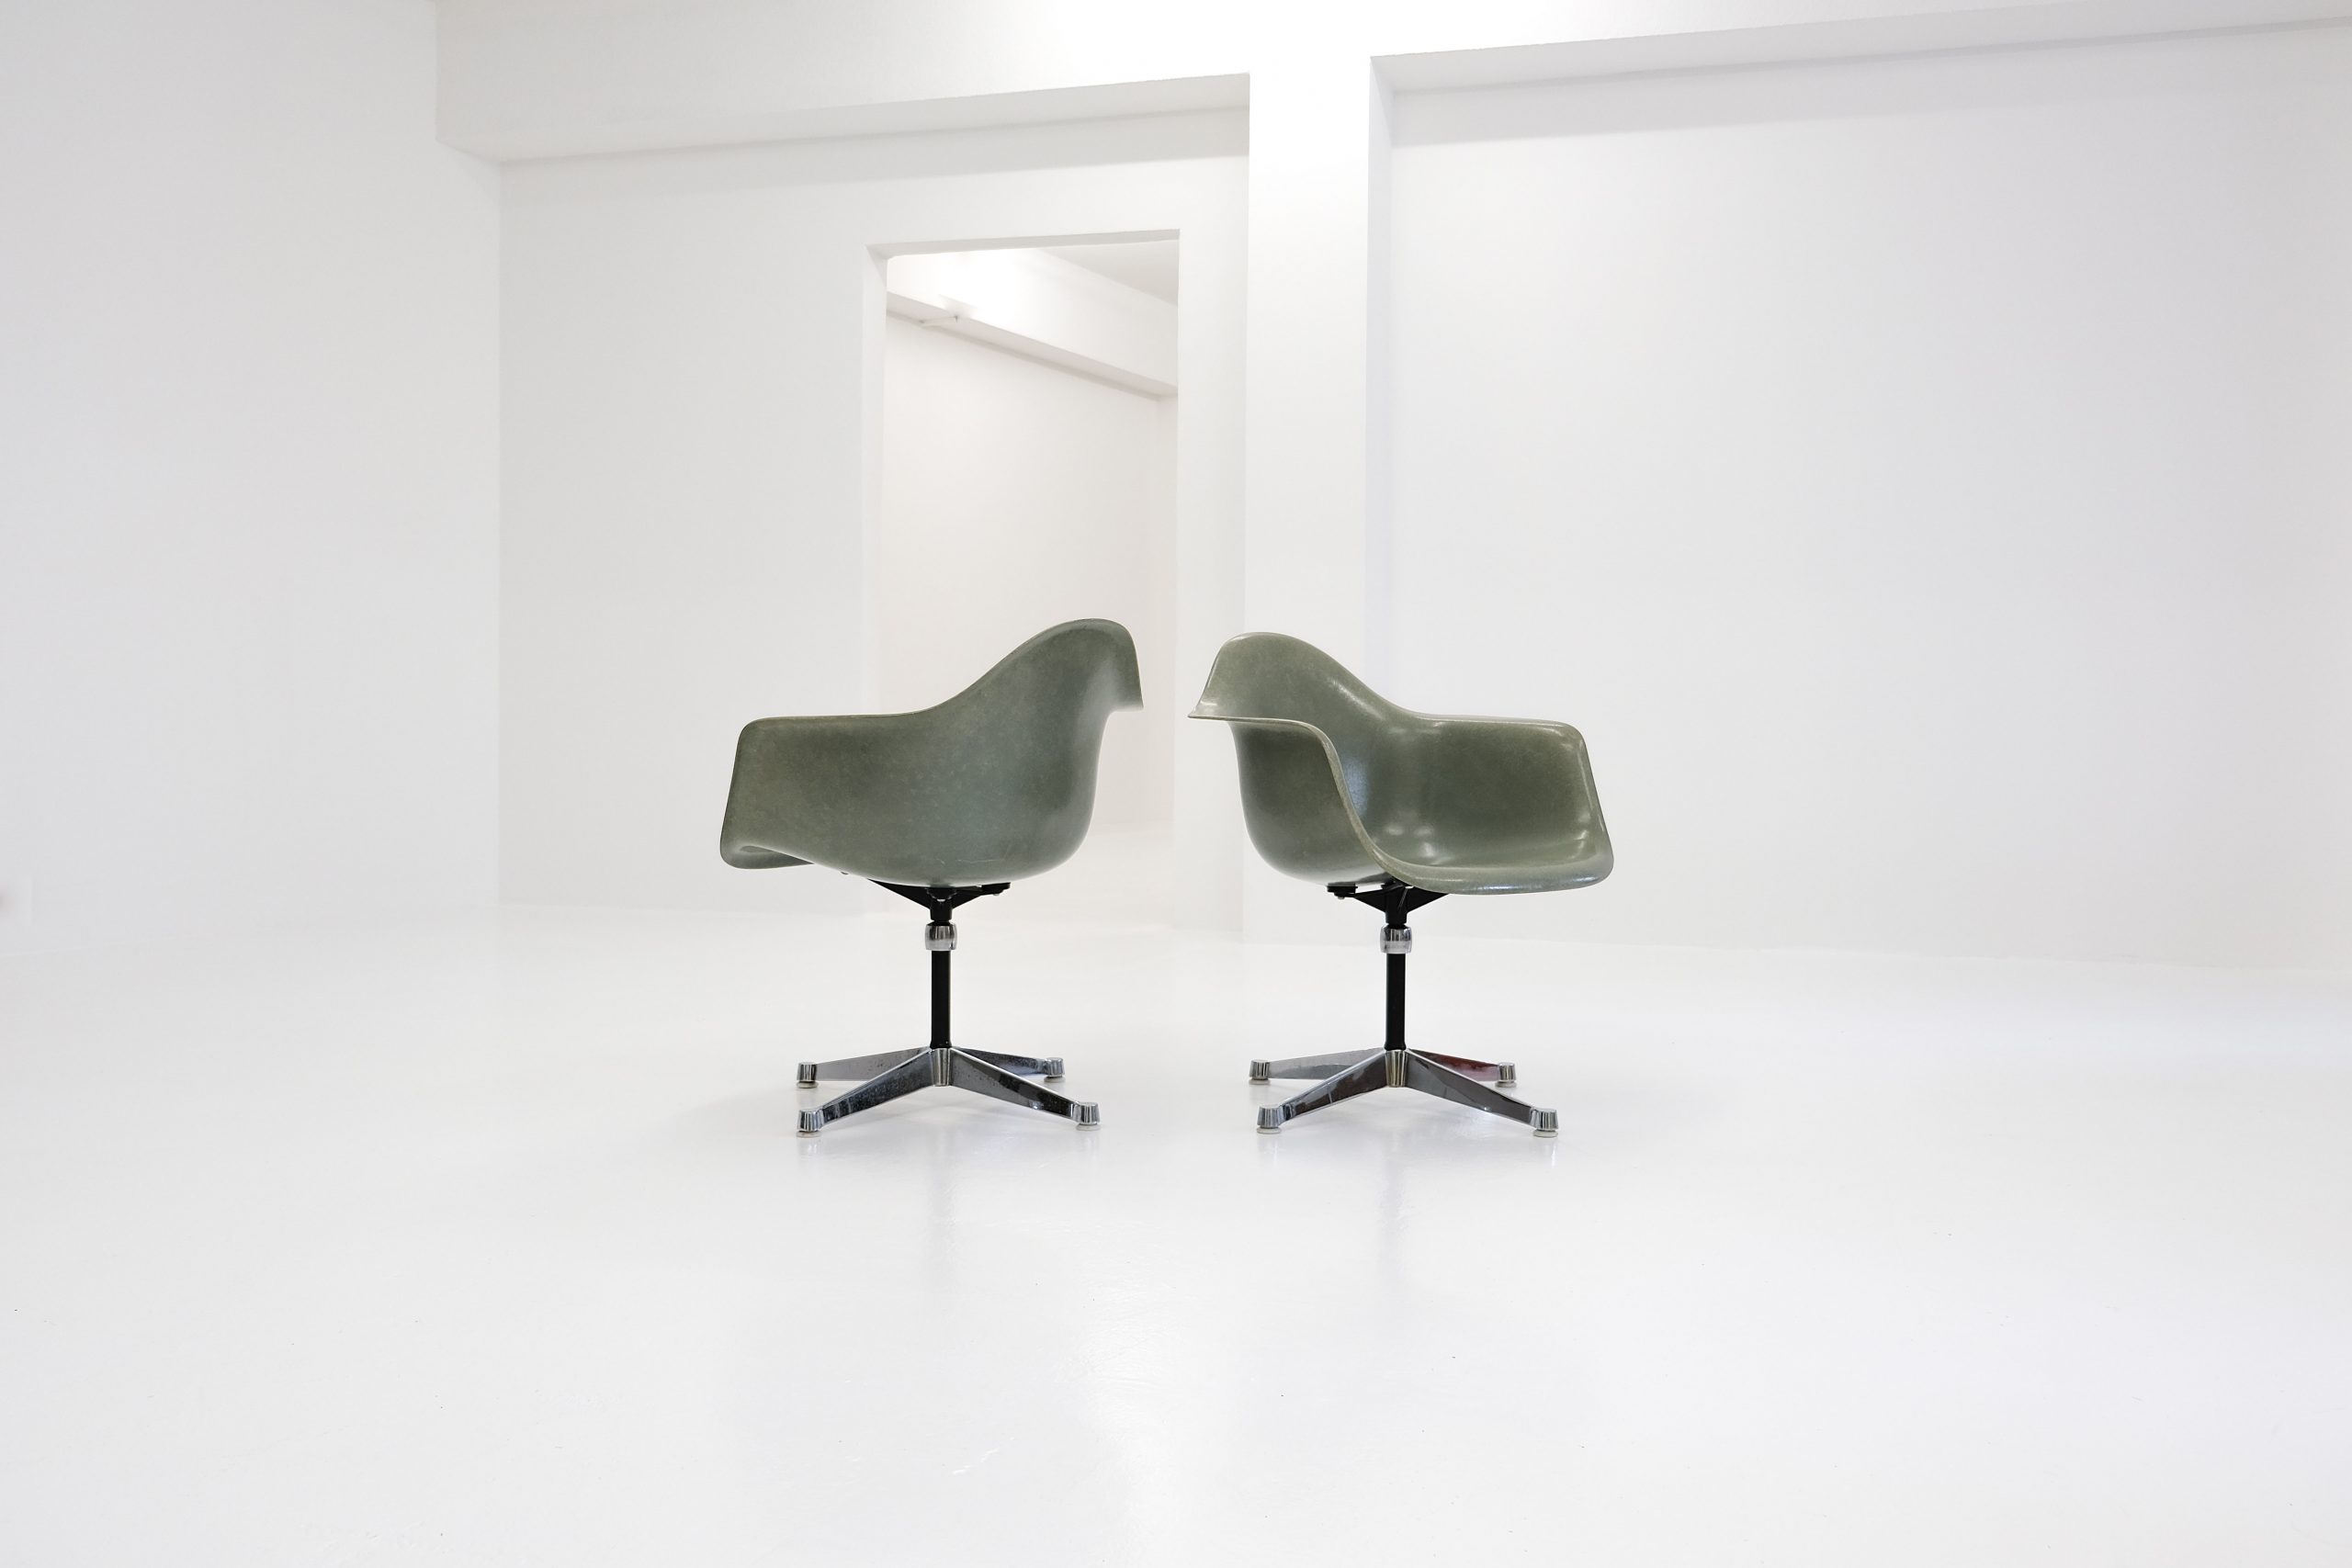 pac-a pivot armchair contract base, adjustable, ray eames, charles eames, eames, herman miller